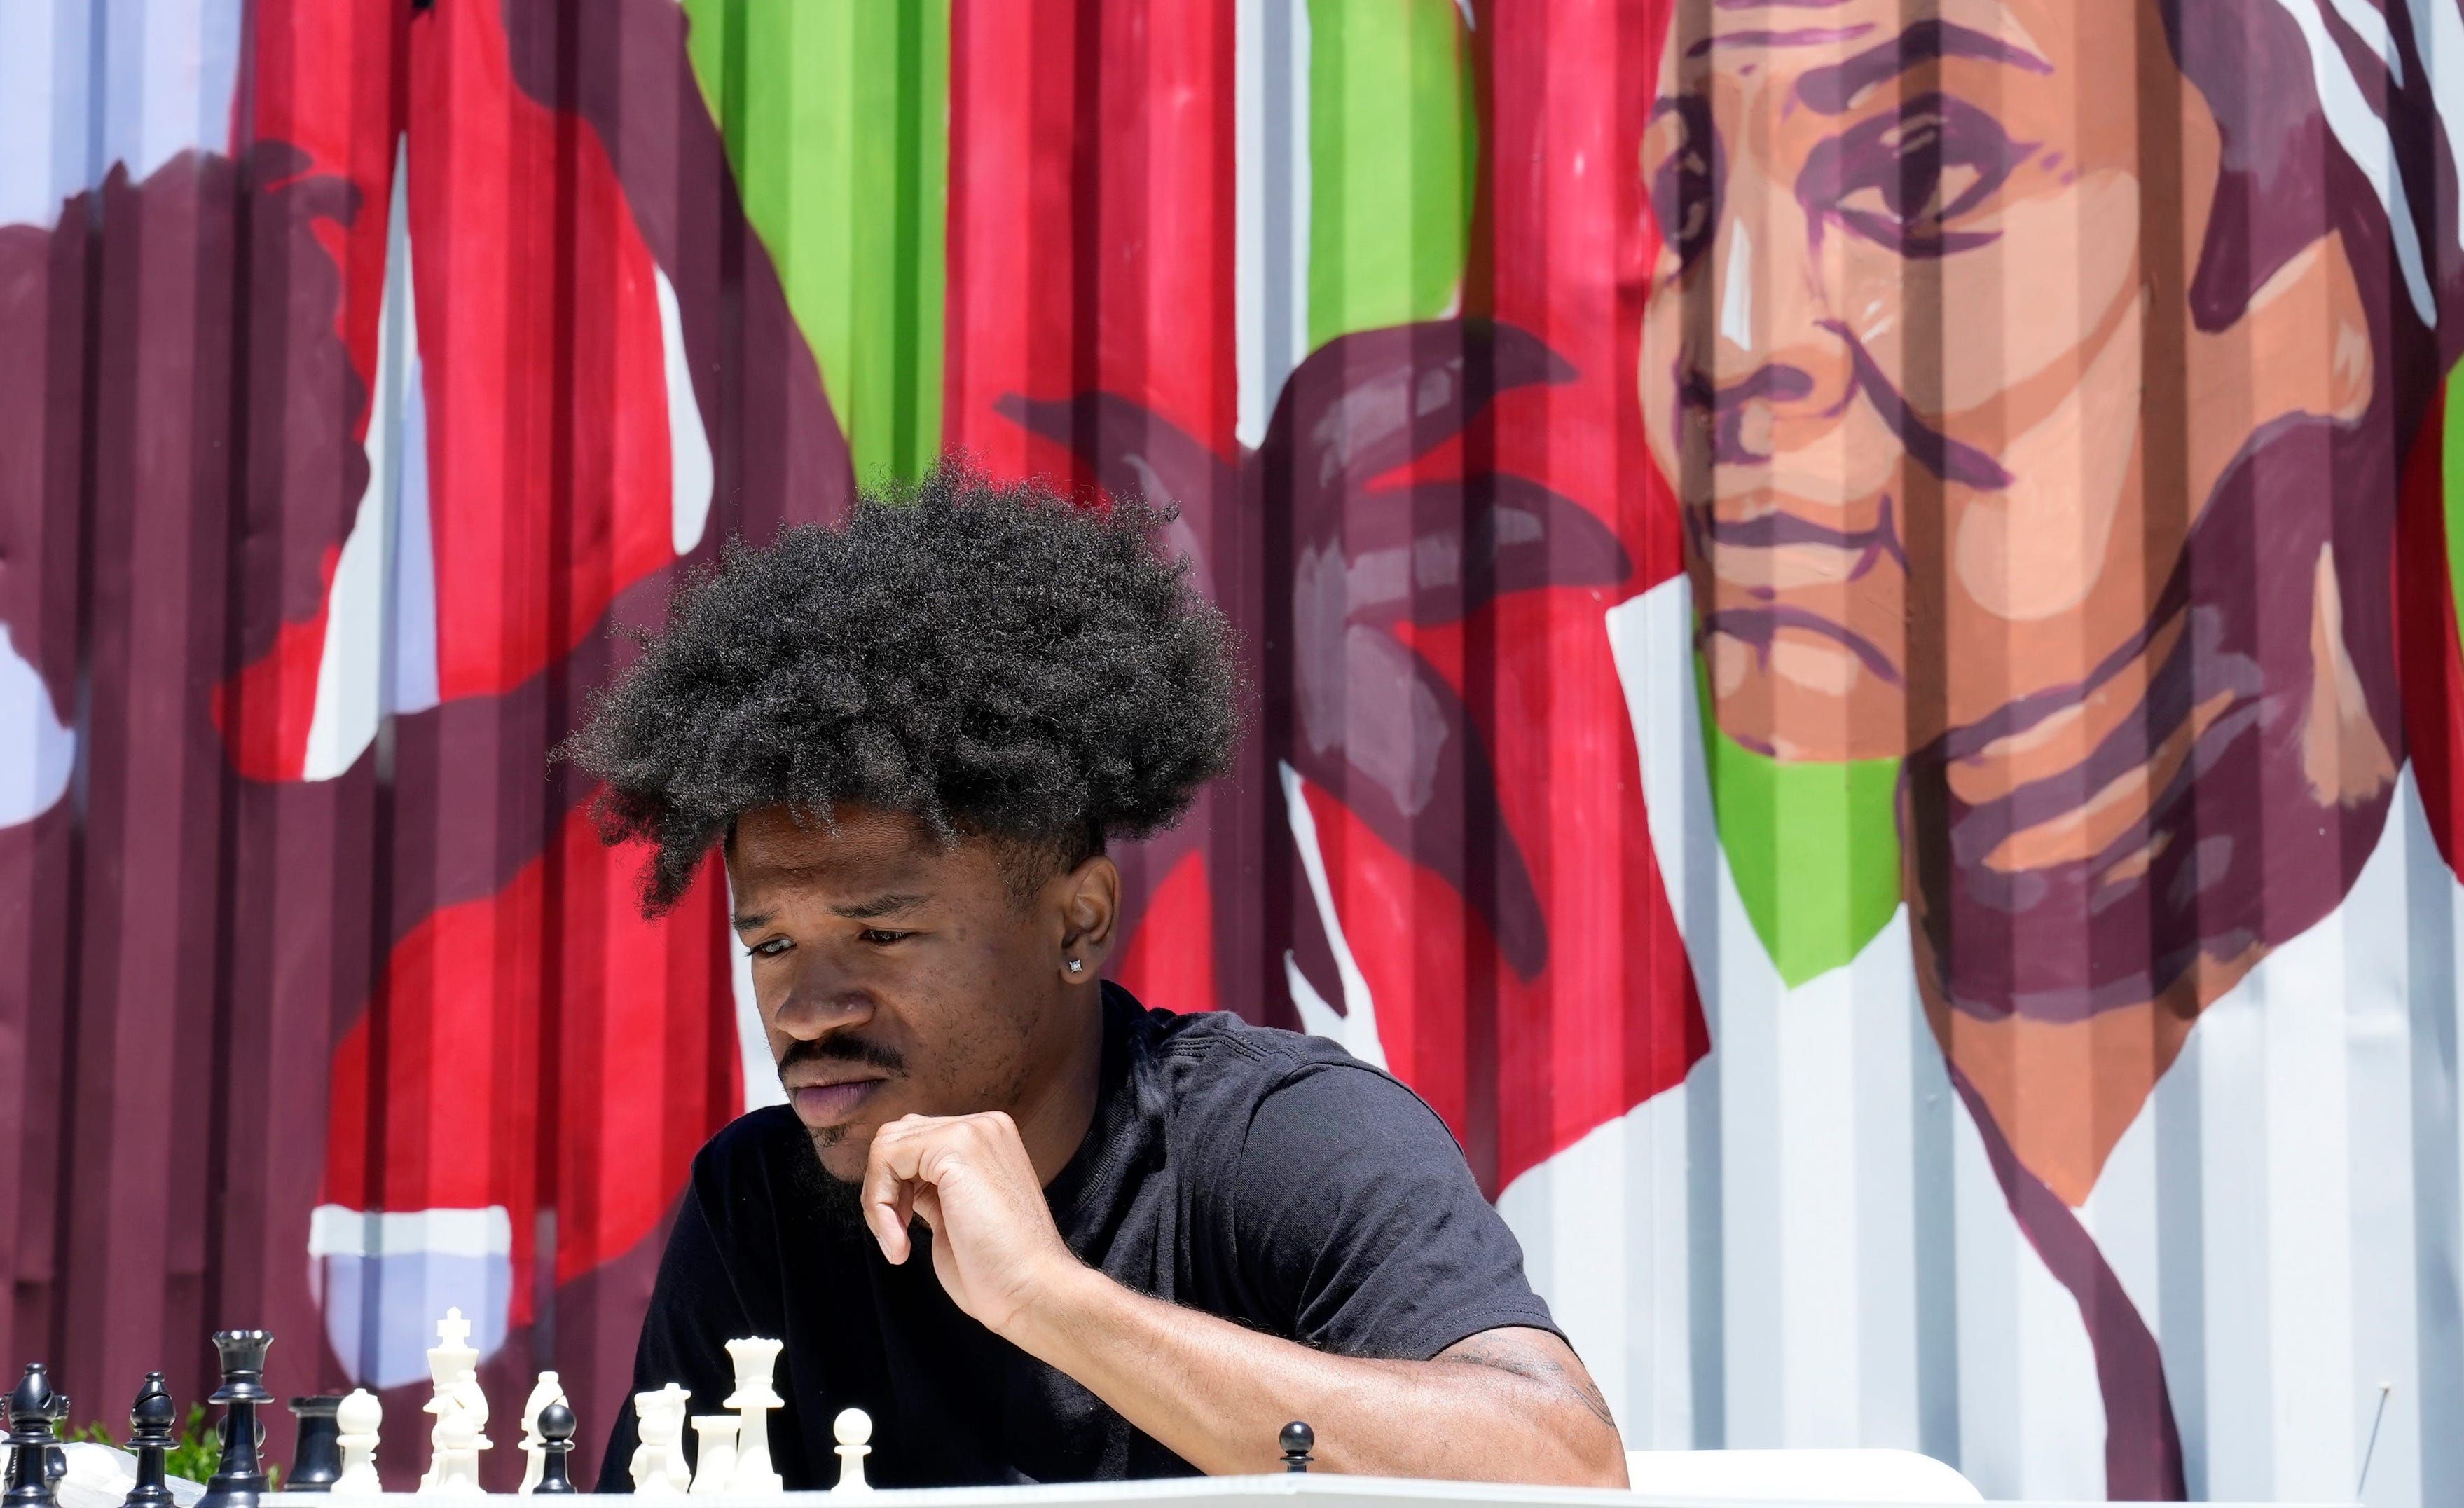 A man concentrates while looking at a chess board